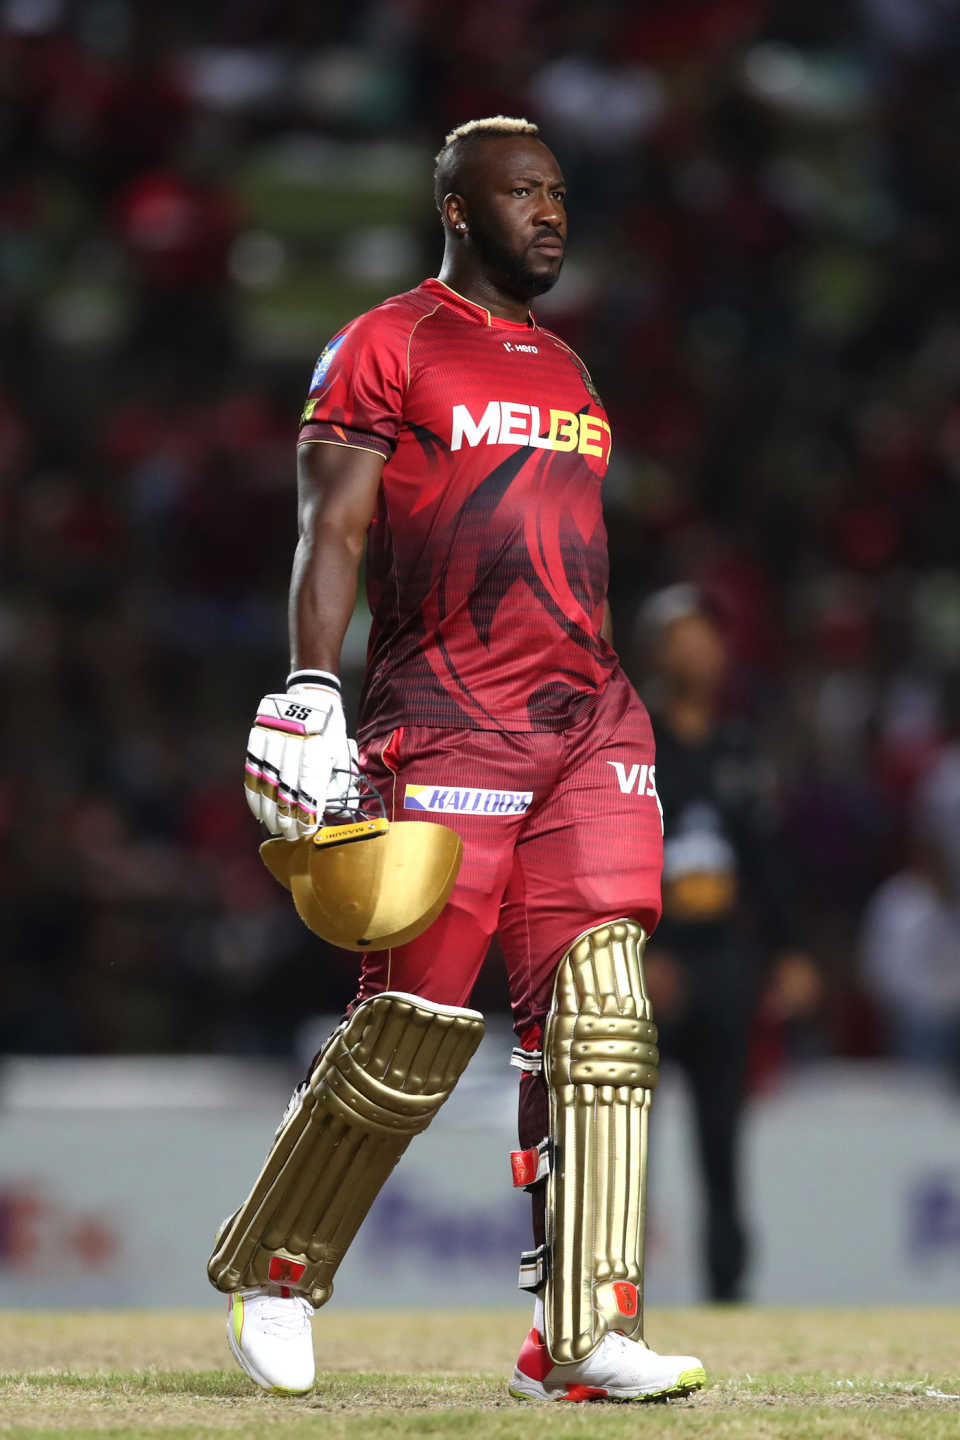 Andre Russell went 4, 6, 6 in the last three balls but it wasn't enough, Trinbago Knight Riders vs St Lucia Kings, CPL 2022, Tarouba, September 18, 2022